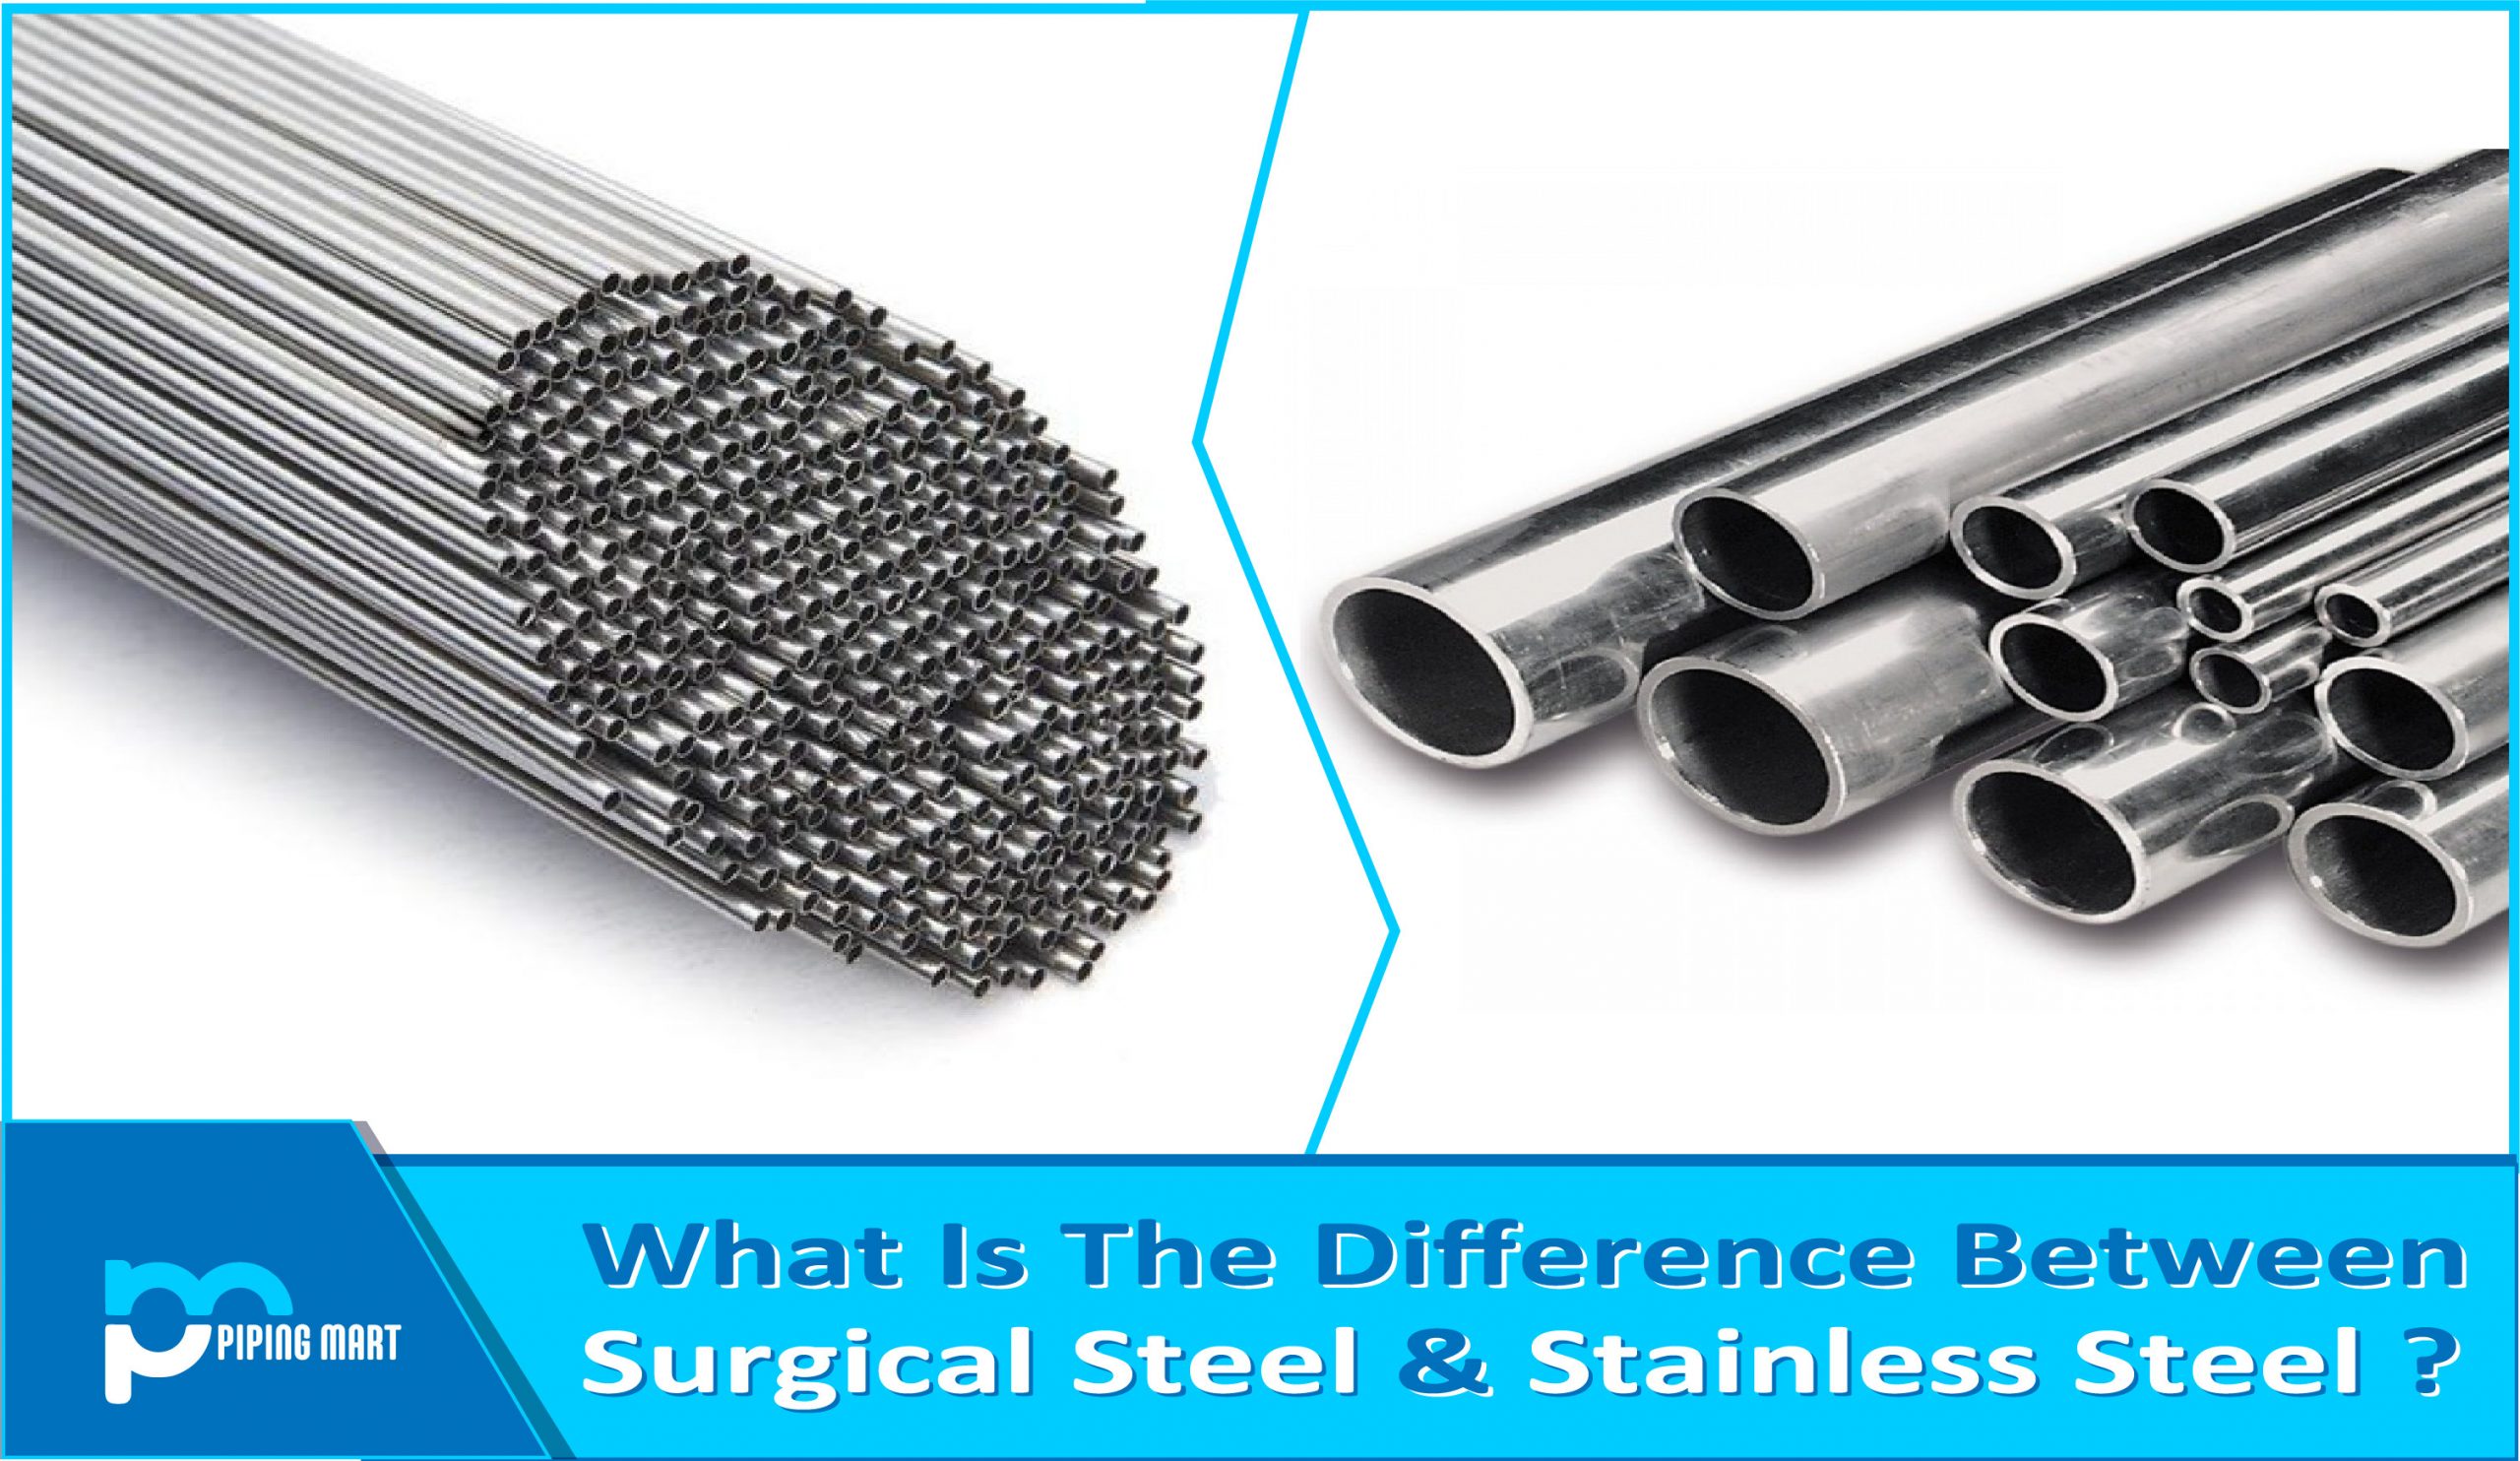 What Is The Difference Between Surgical Steel & Stainless Steel?